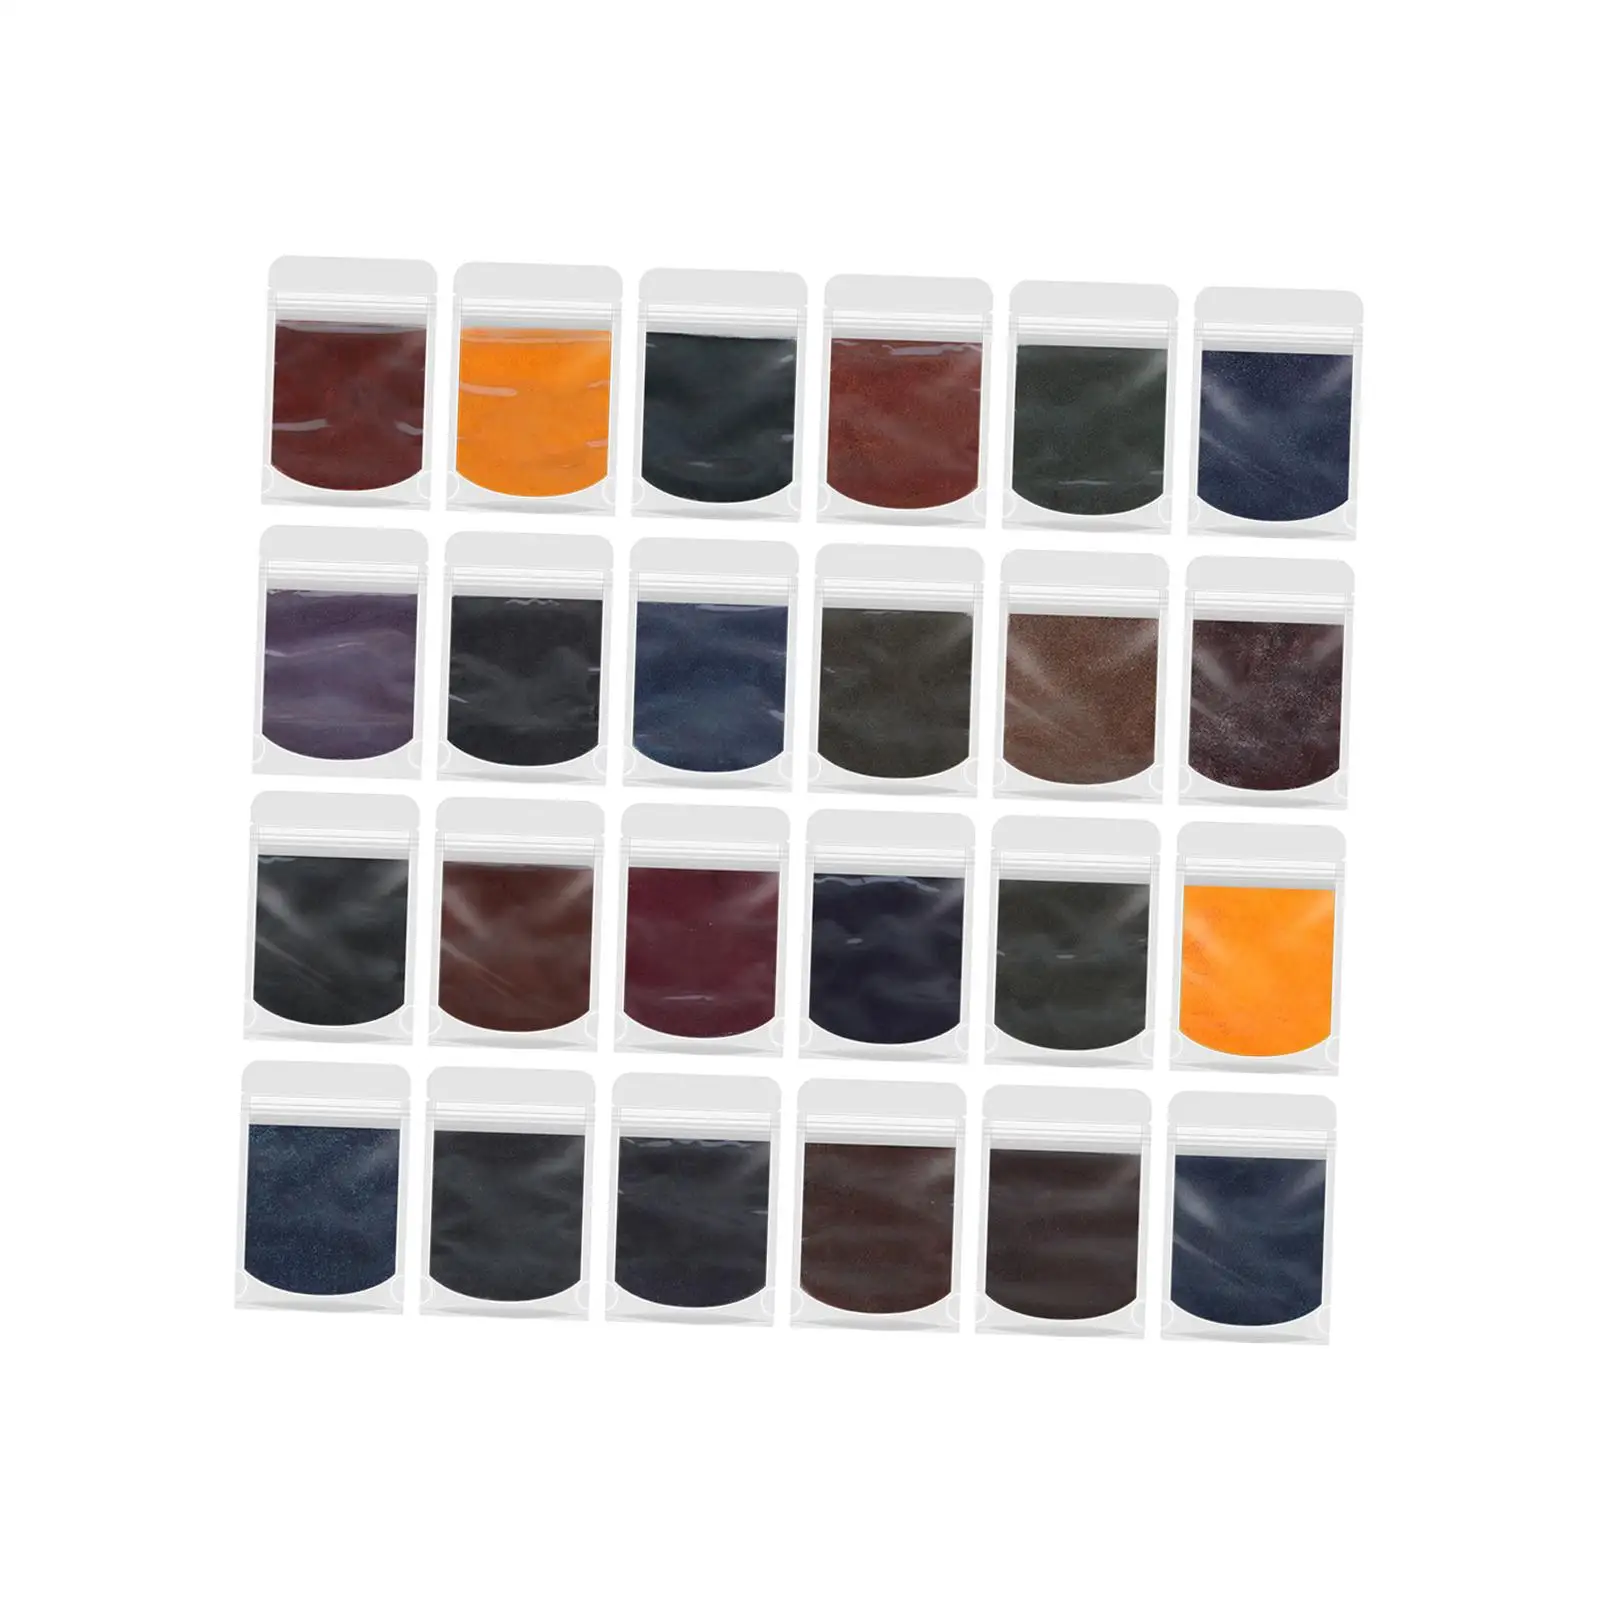 Tie Powder for Tie Dyeing Portable DIY 24 Vibrant Colors Coloring Color Powder Packets for Kids Adults Crafts Making Shirts